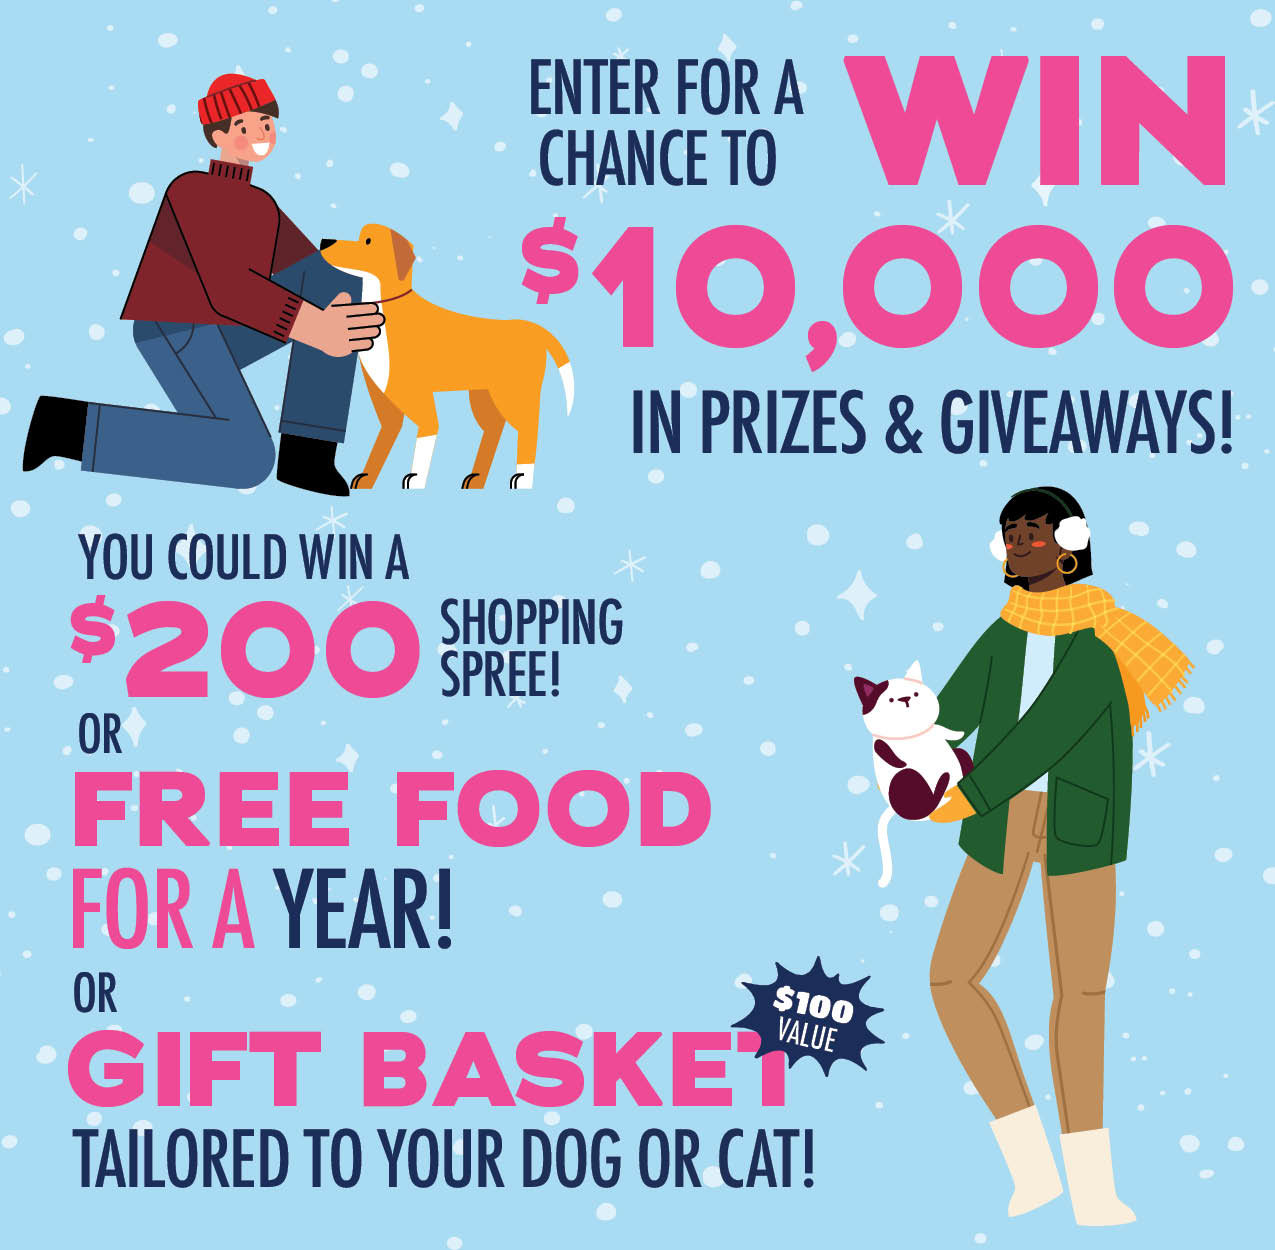 enter for a chance to win $10,000 in prizes and giveaways